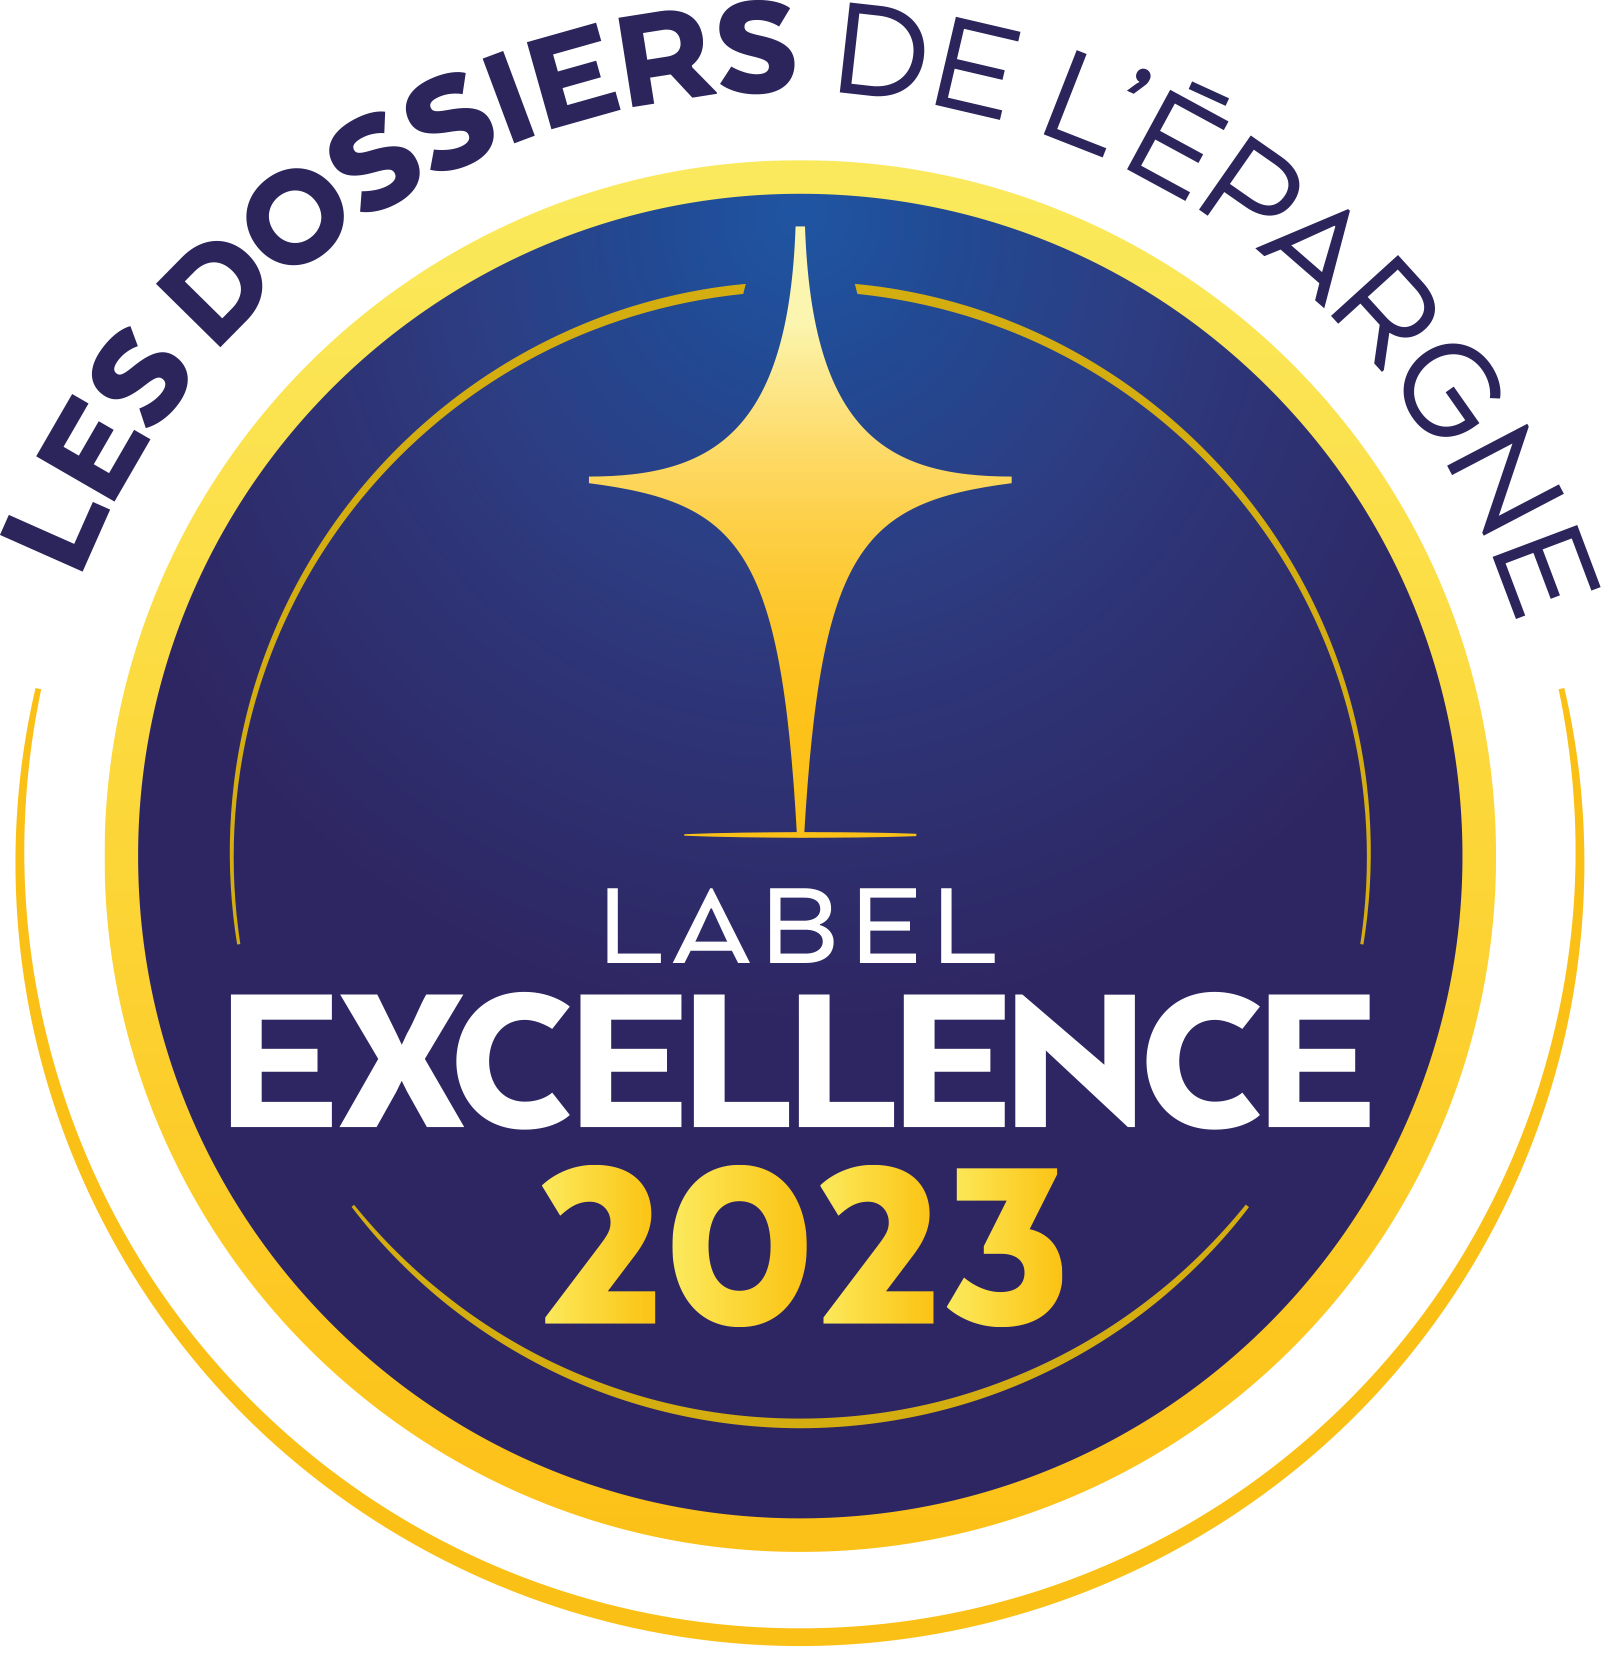 Label excellce 2023